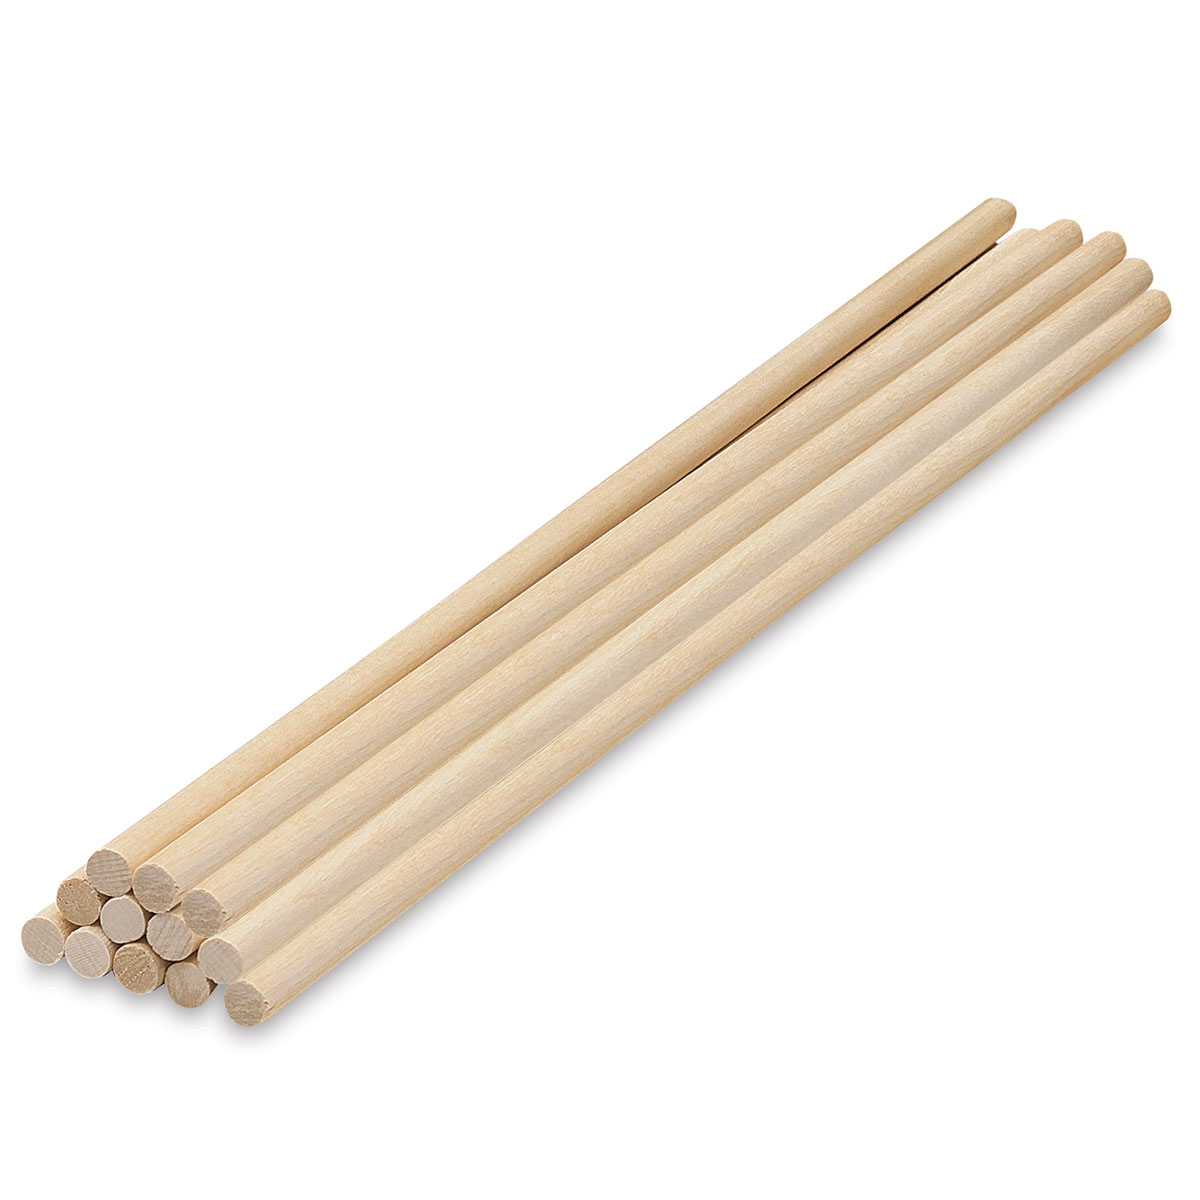 Wood Square Dowel Rods 1/4-inch x 12 Pack of 100 Wooden Craft